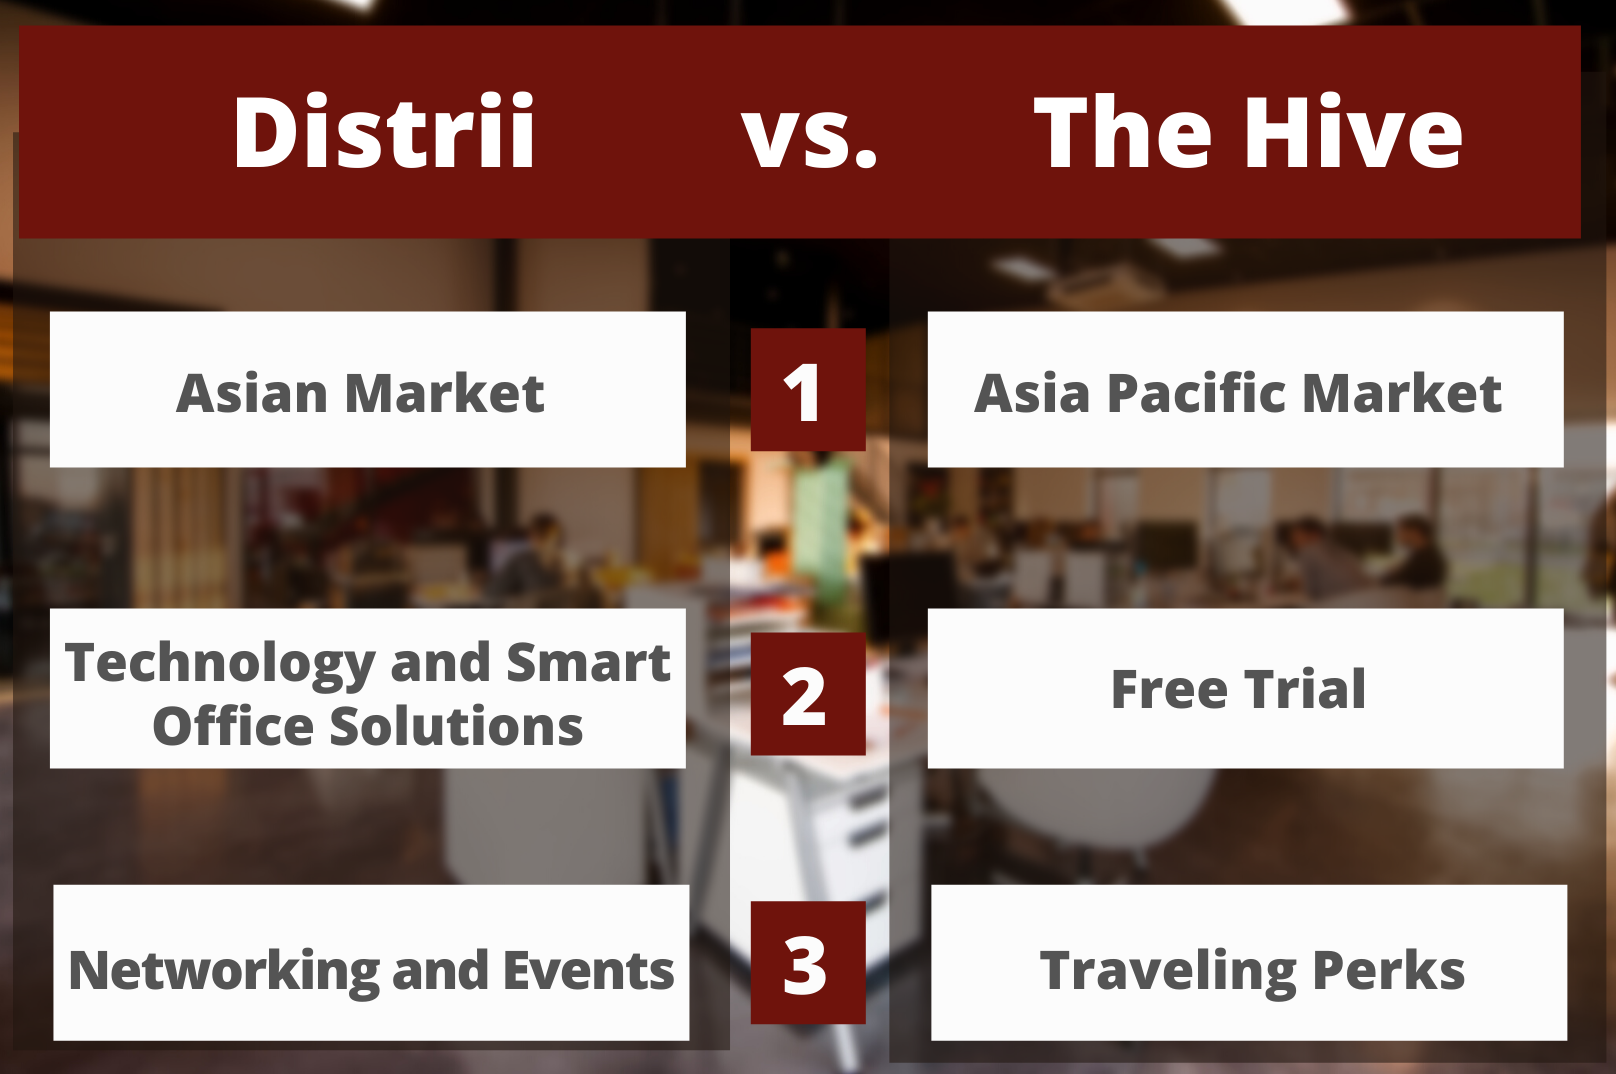 Distrii vs. Justco office spaces Singapore 